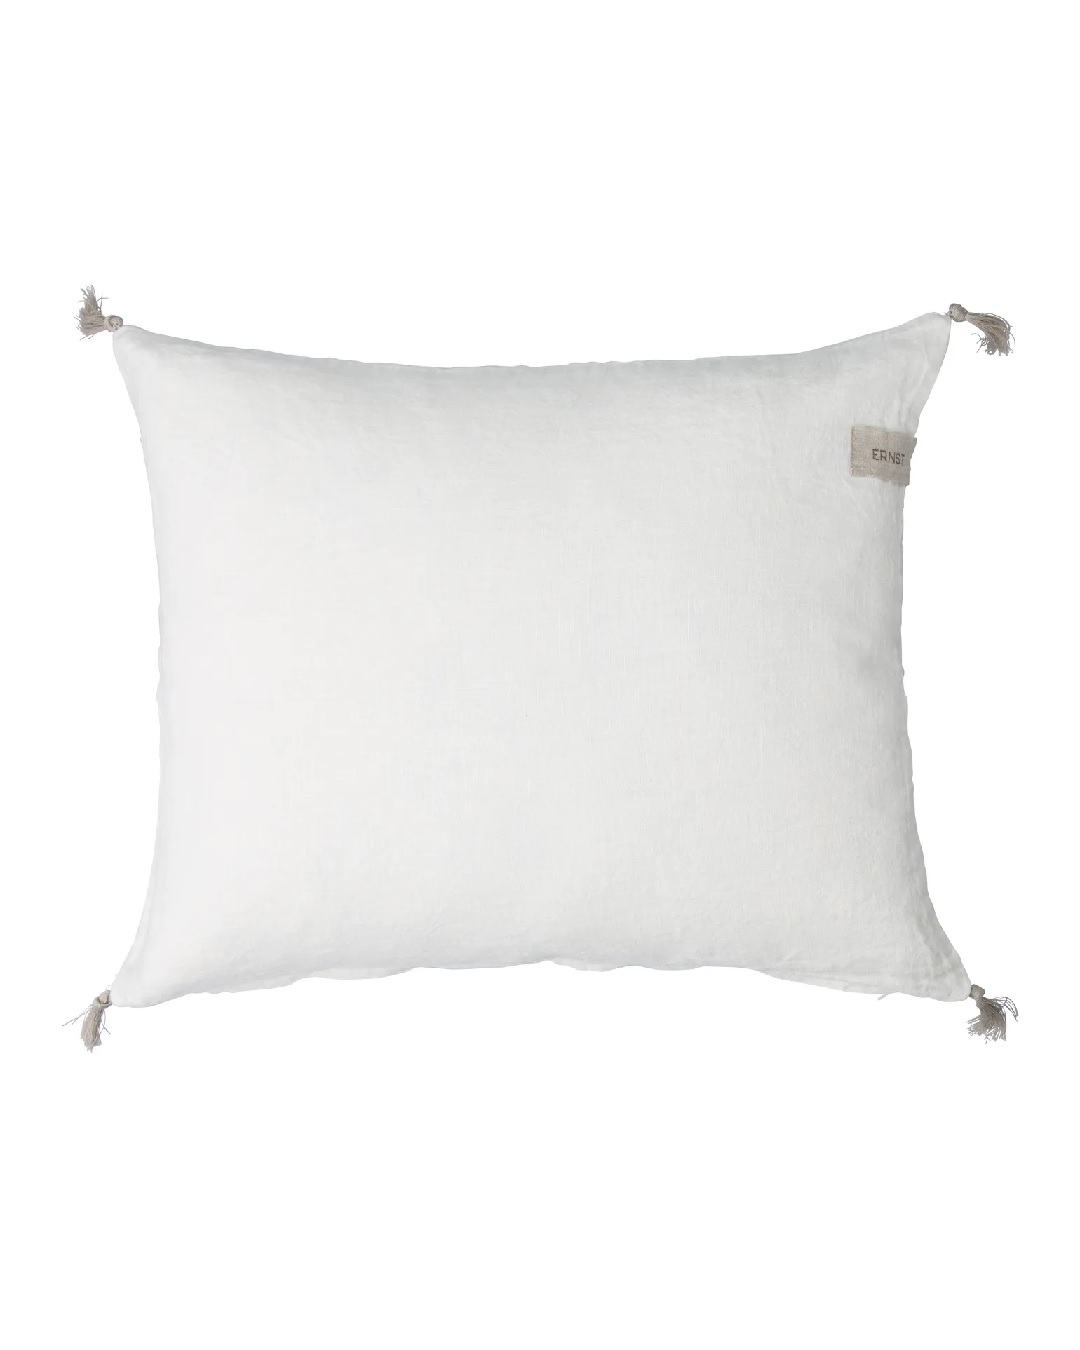 Ernst cushion cover in white with tassels